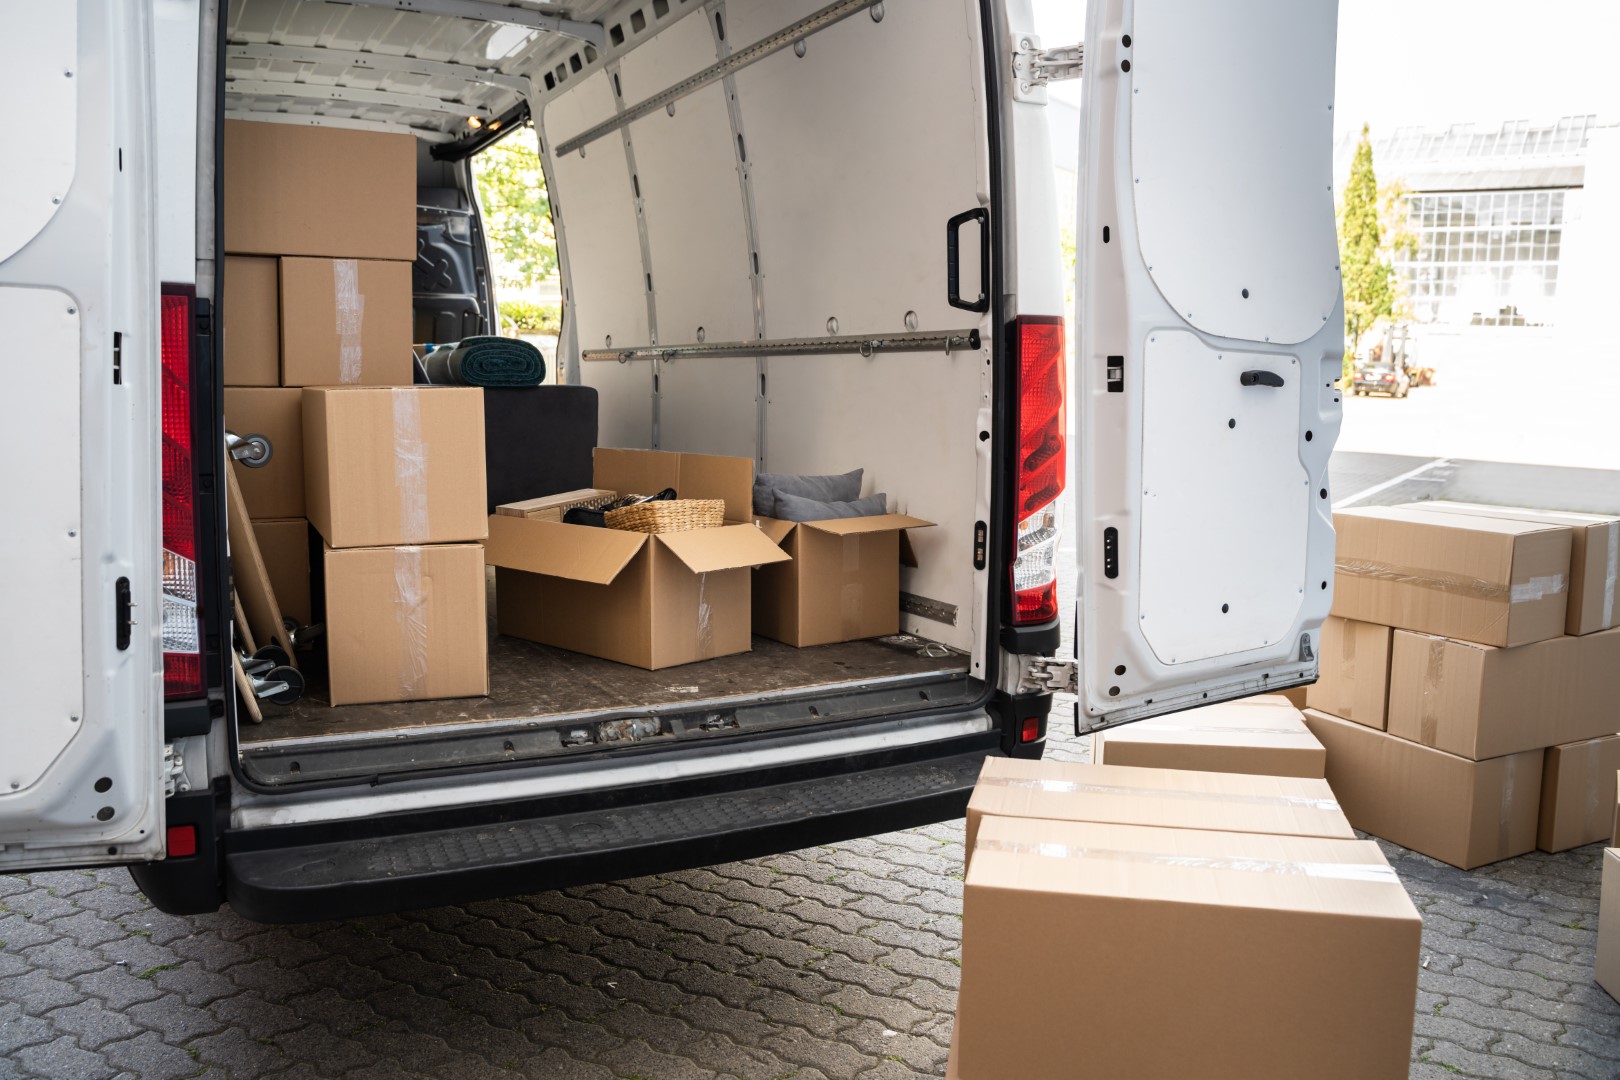 Removal services in Swansea